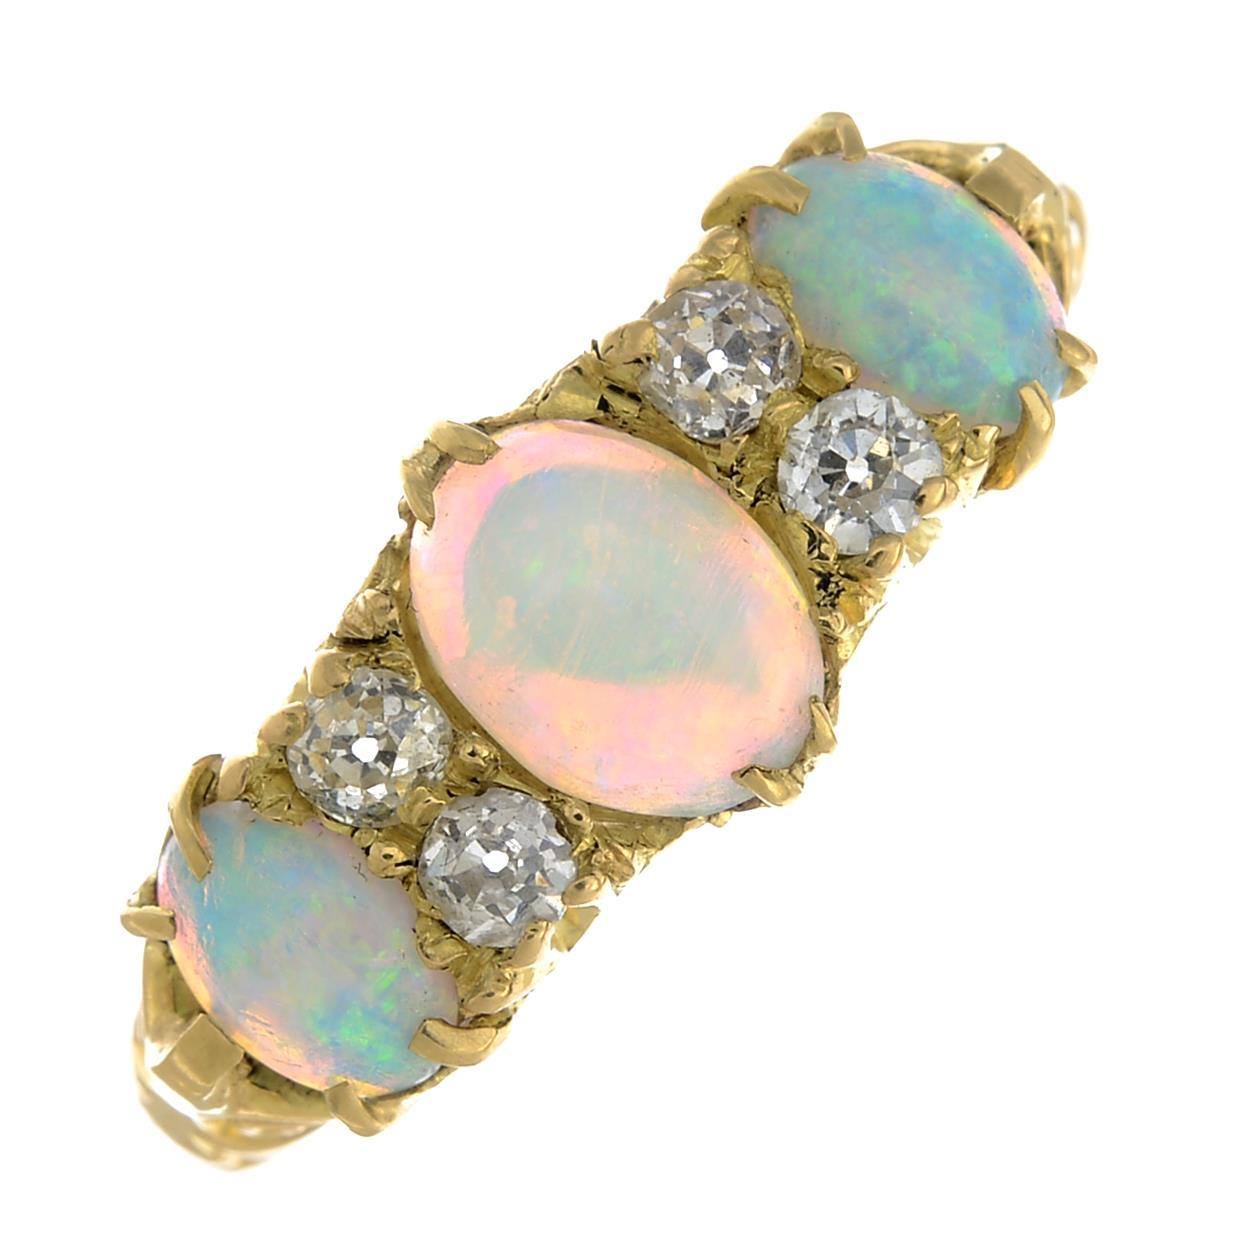 Brilliant Cut Early 20th Century Gold Opal and Diamond Dress Ring